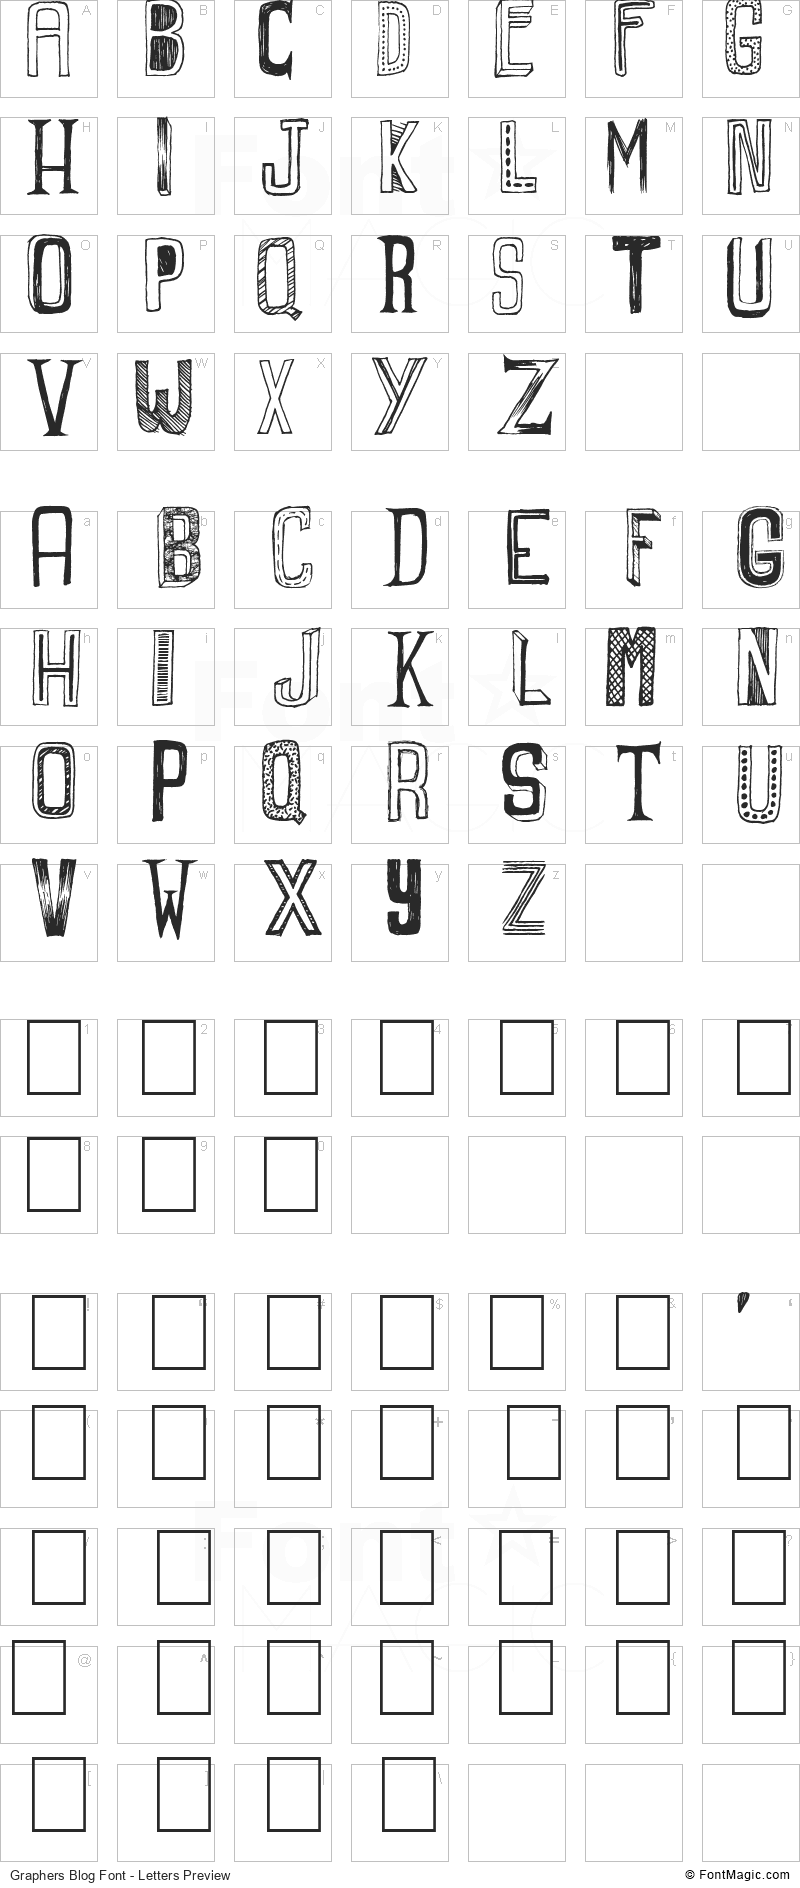 Graphers Blog Font - All Latters Preview Chart